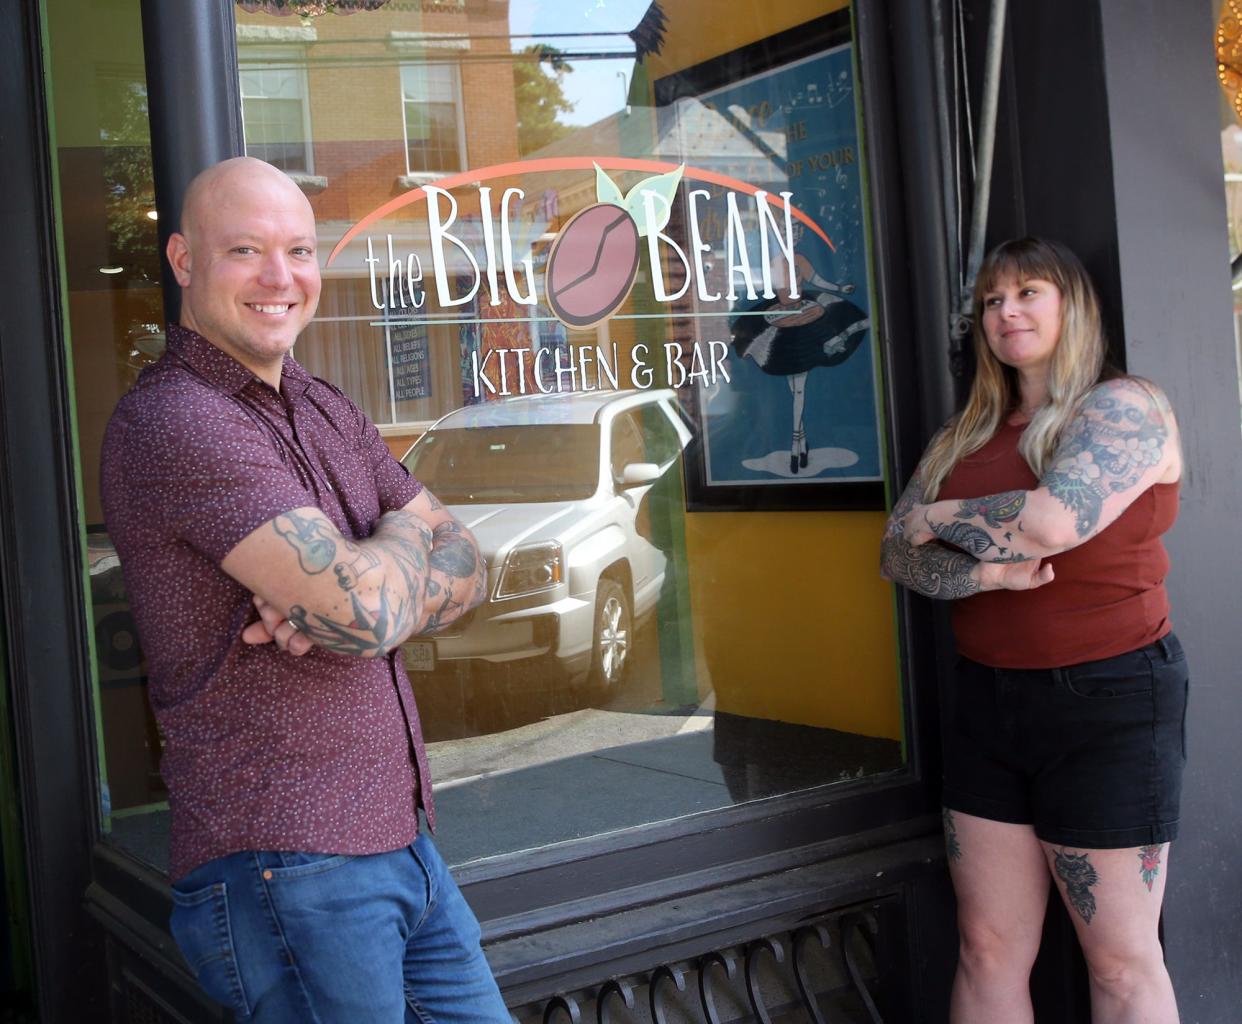 Big Bean owners Jon and Arley Wells are opening their Exeter eatery at 163 Water St.